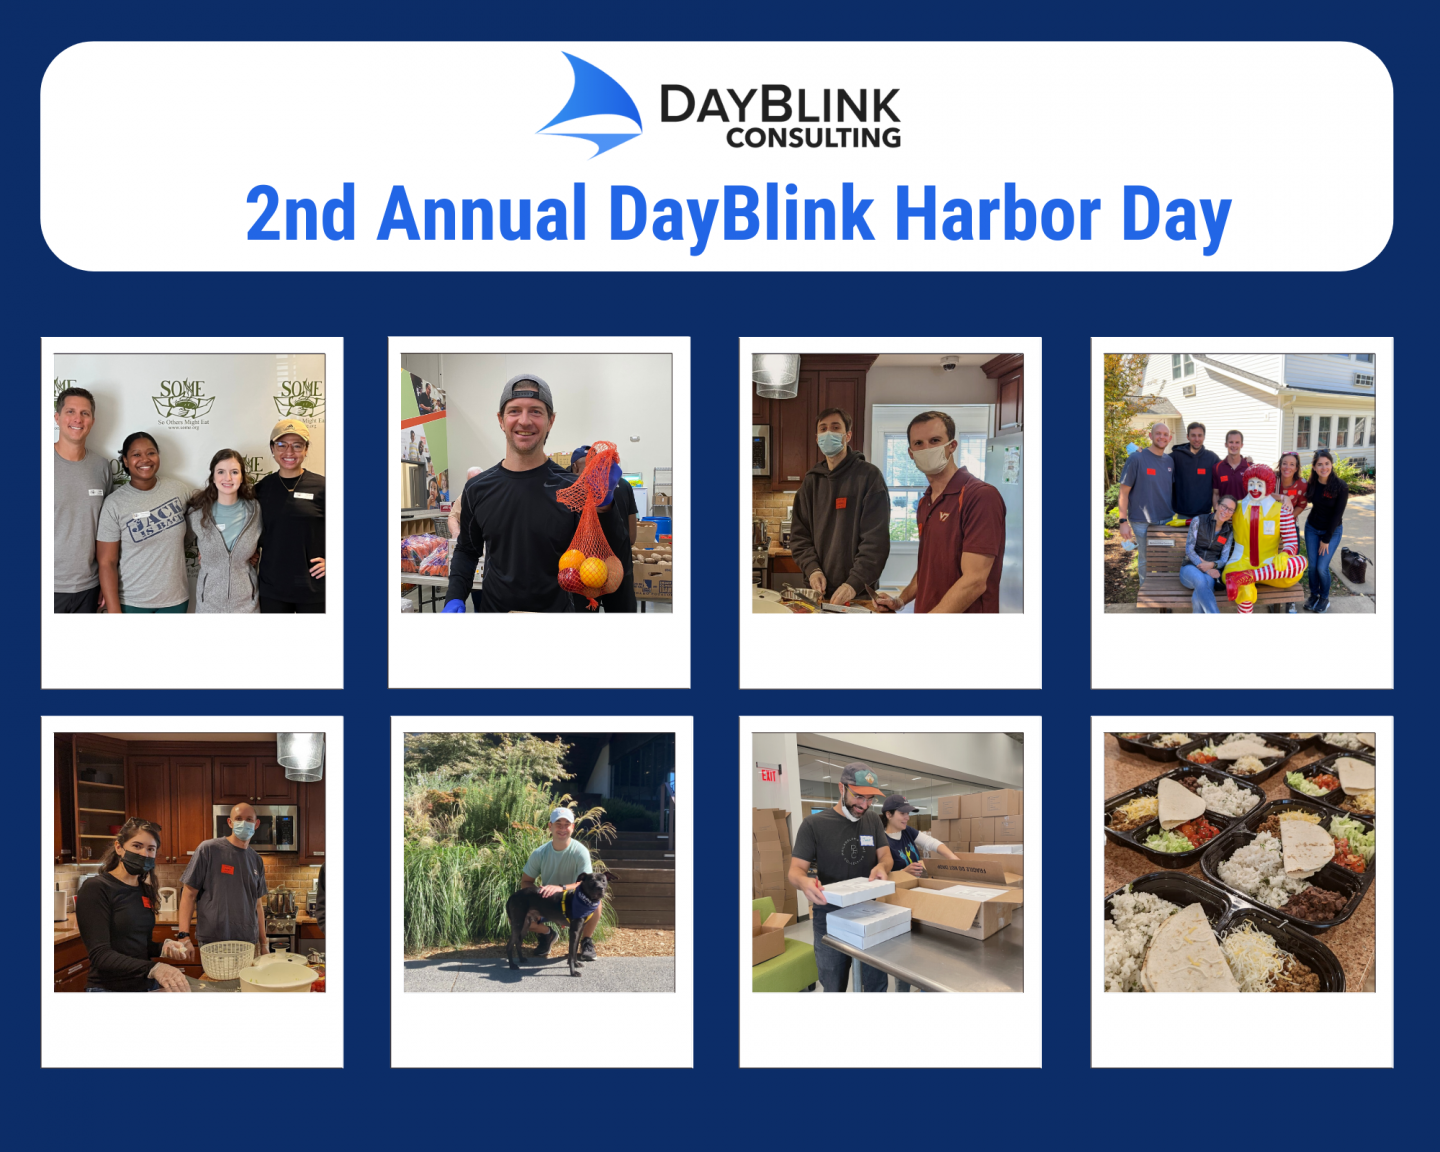 DayBlink Consulting comes together to volunteer during 2nd annual Harbor Day